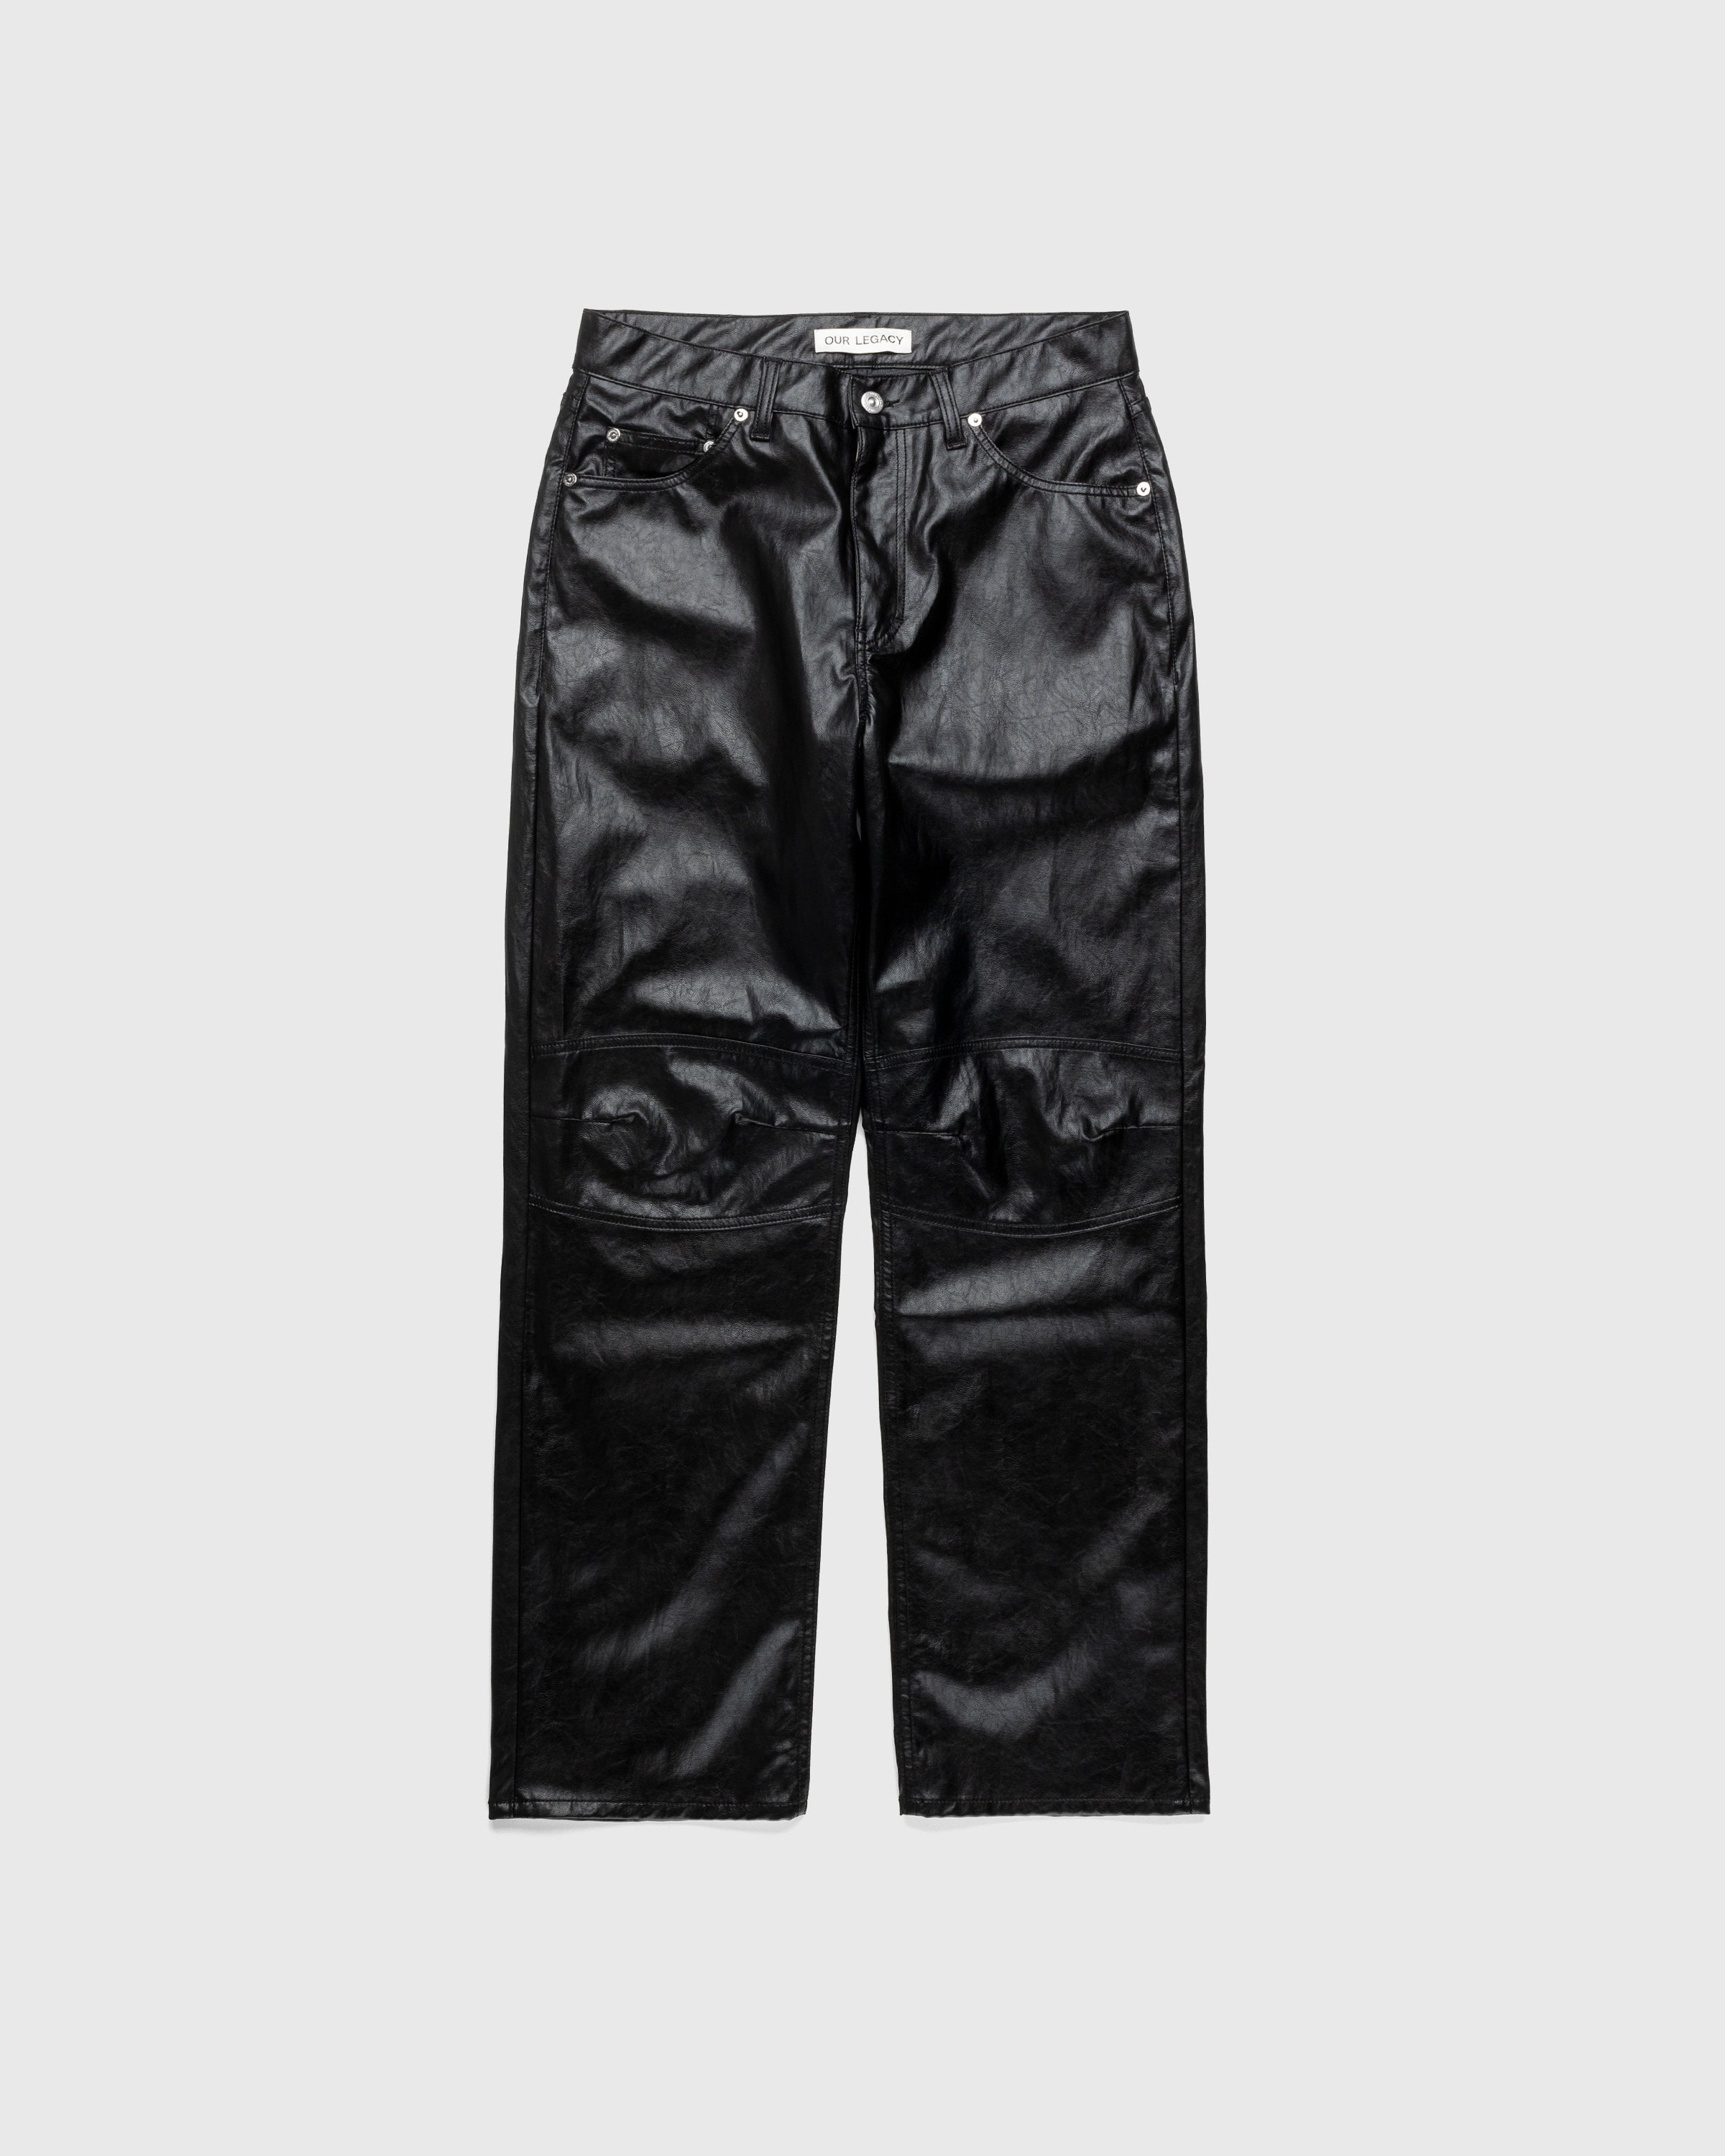 Our Legacy - Formal Moto Cut Trouser Black - Clothing - Black - Image 1